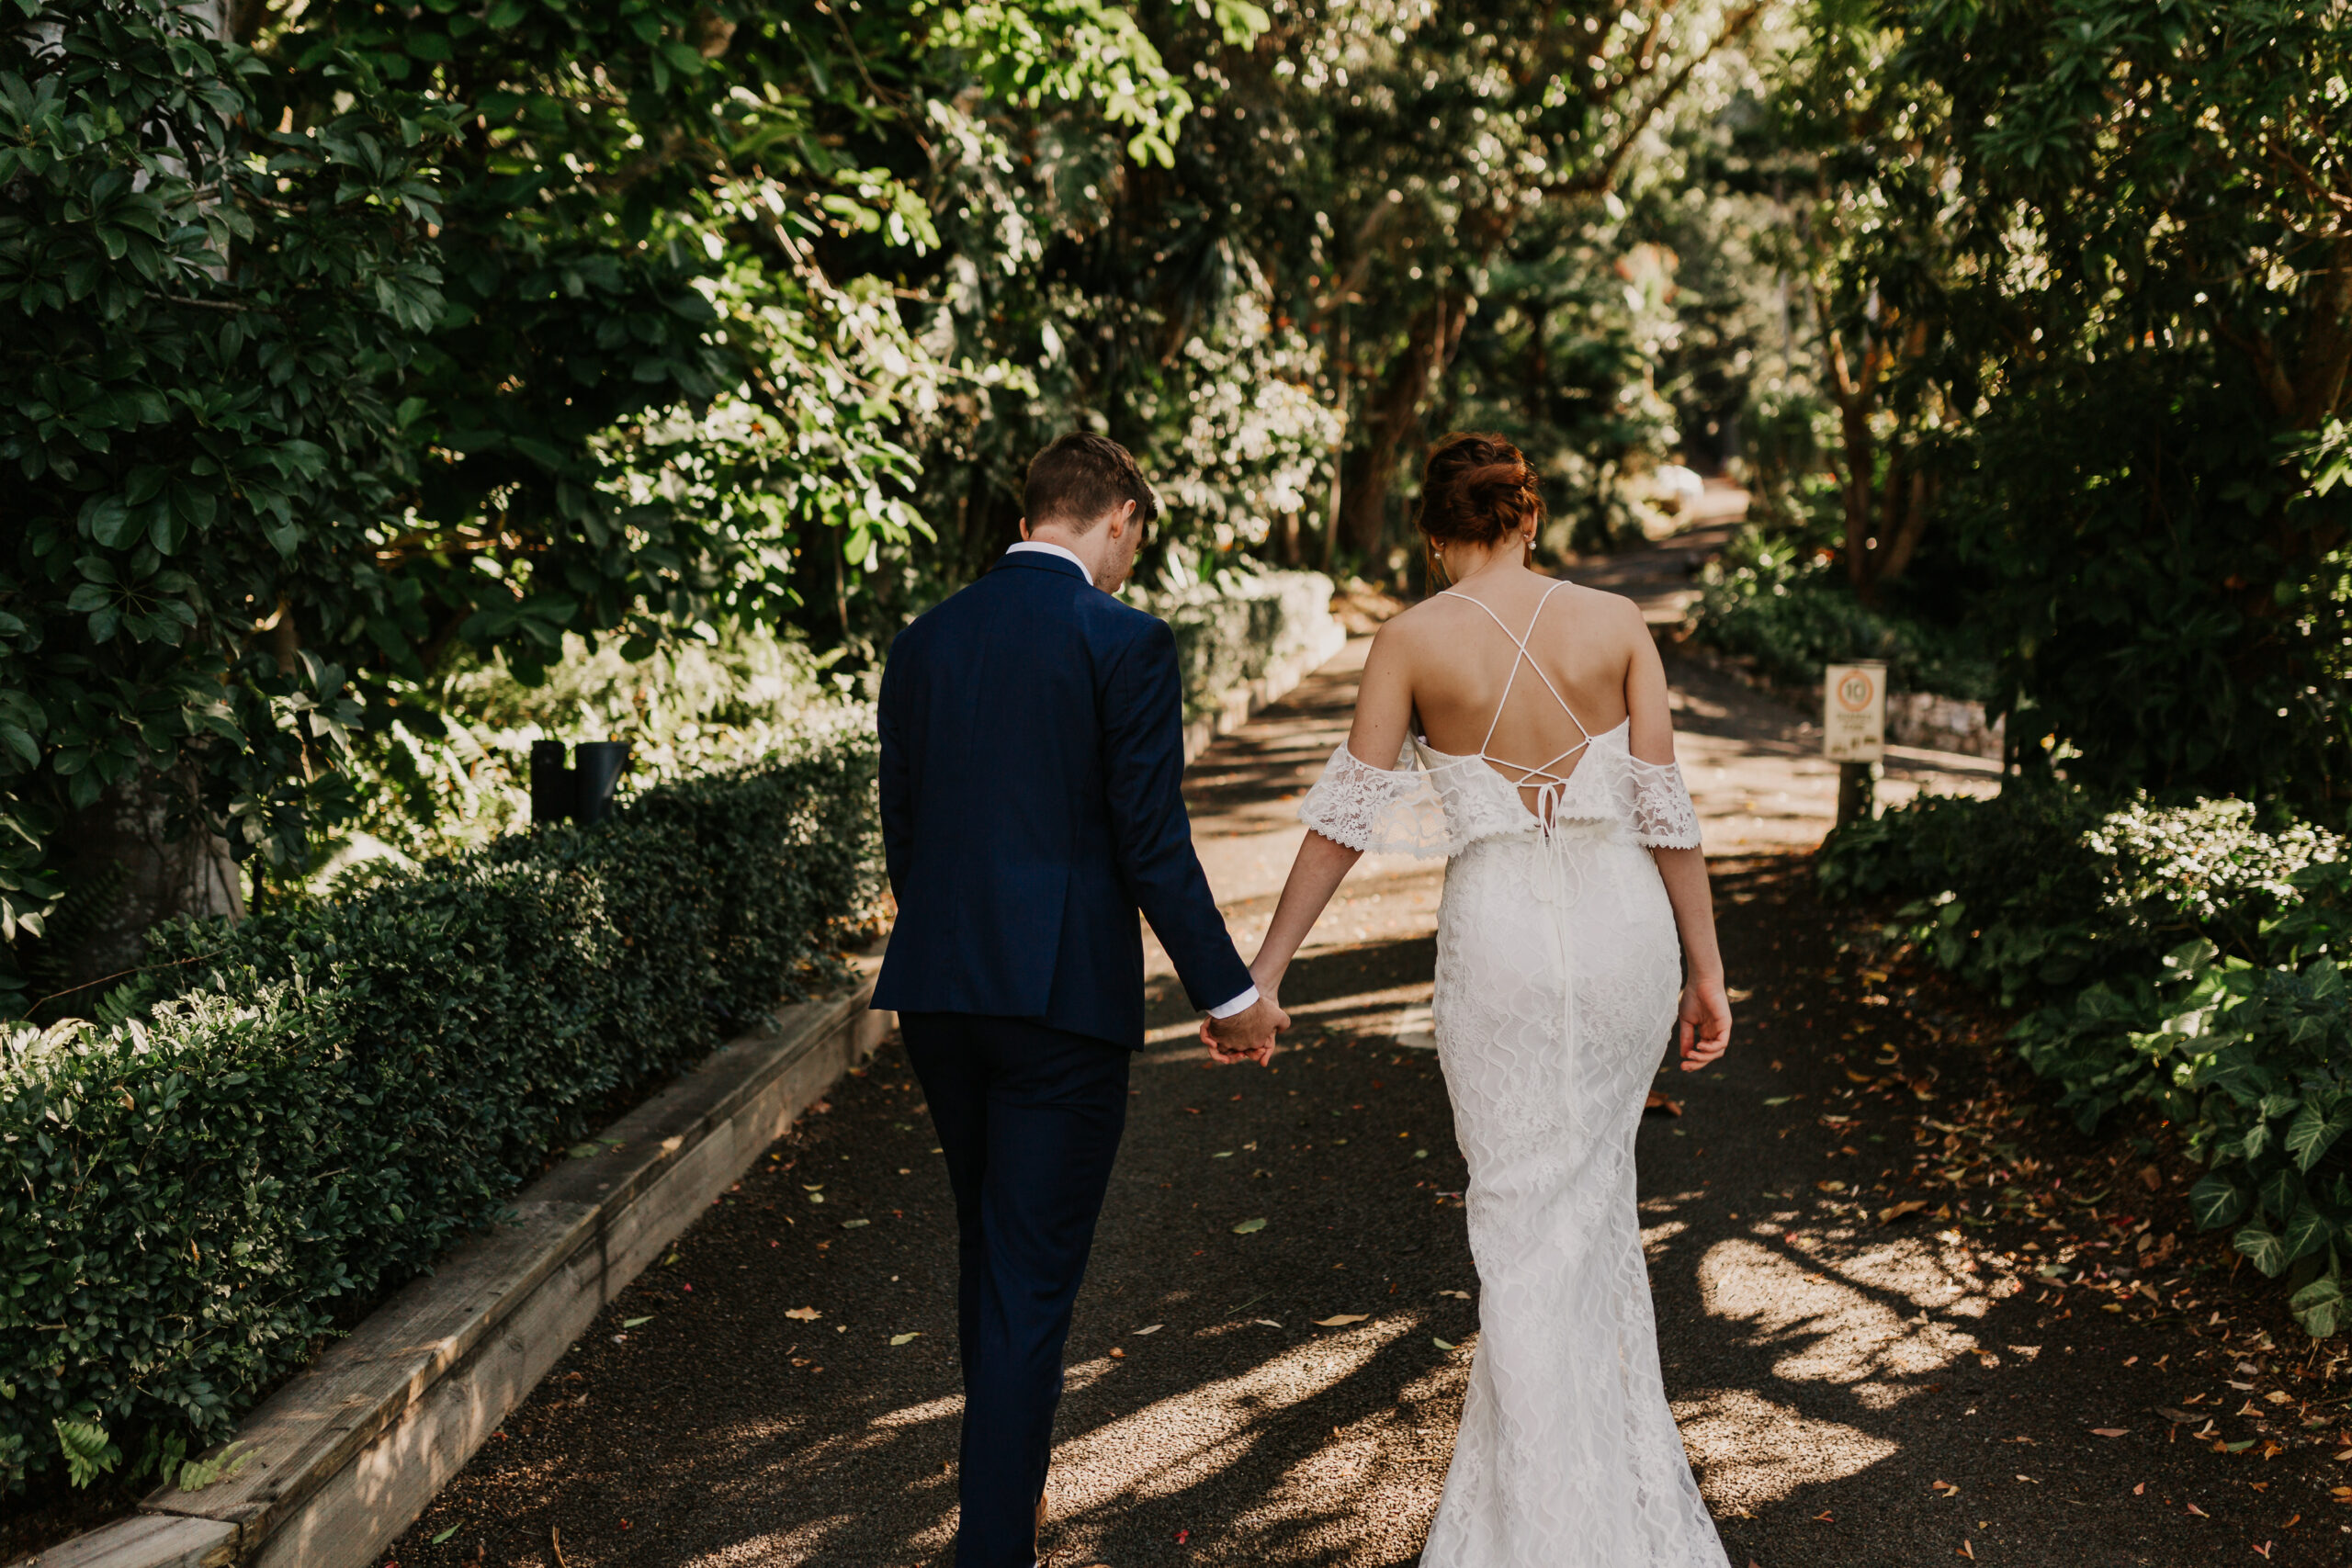 Rainforest Gardens Romantic Wedding Inspiration Shoot Two Wild Hearts Photography 53 scaled